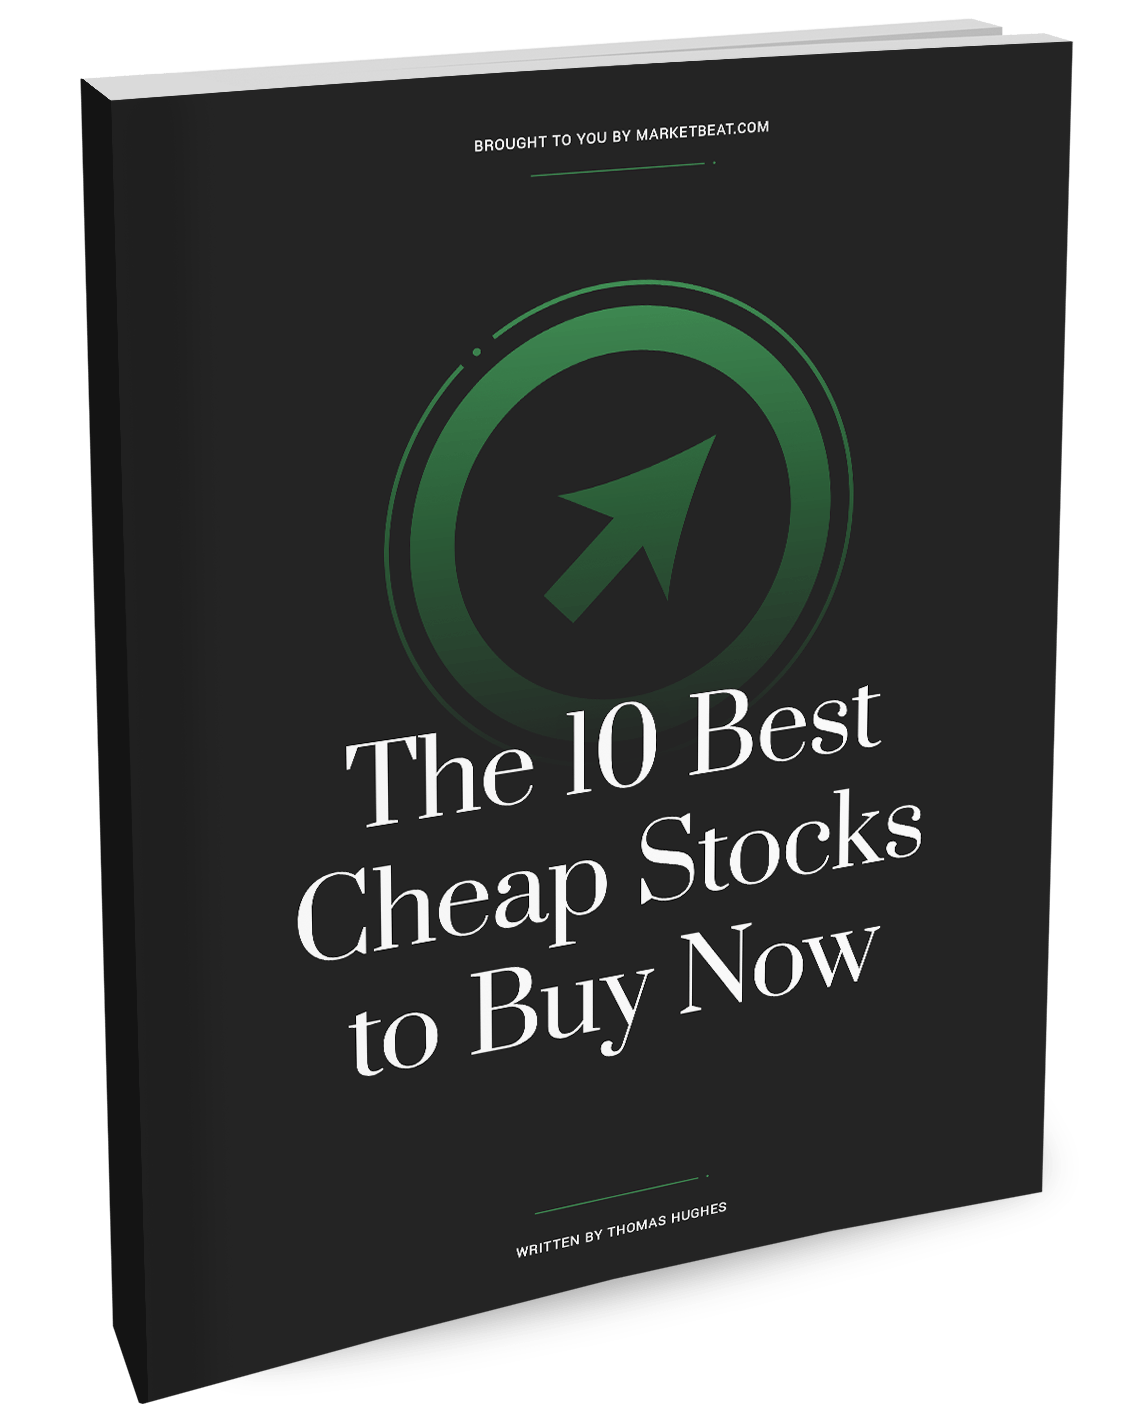 The 10 best cheap stocks to buy right now